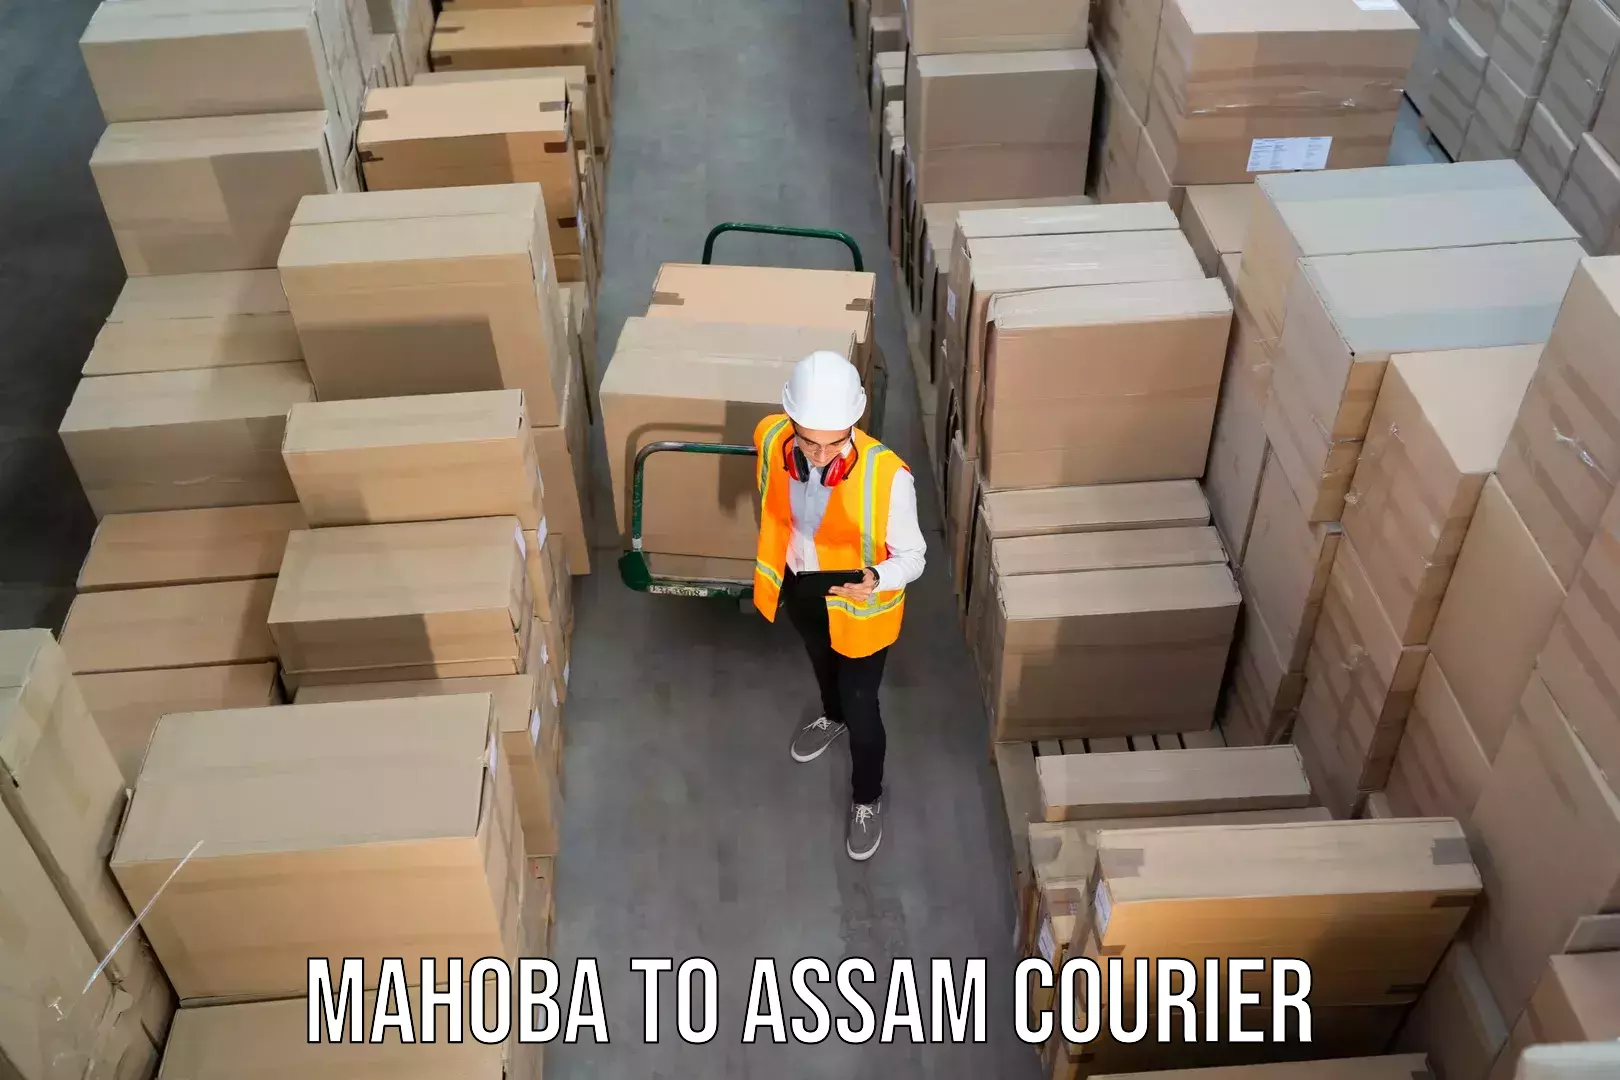 On-call courier service Mahoba to Boko